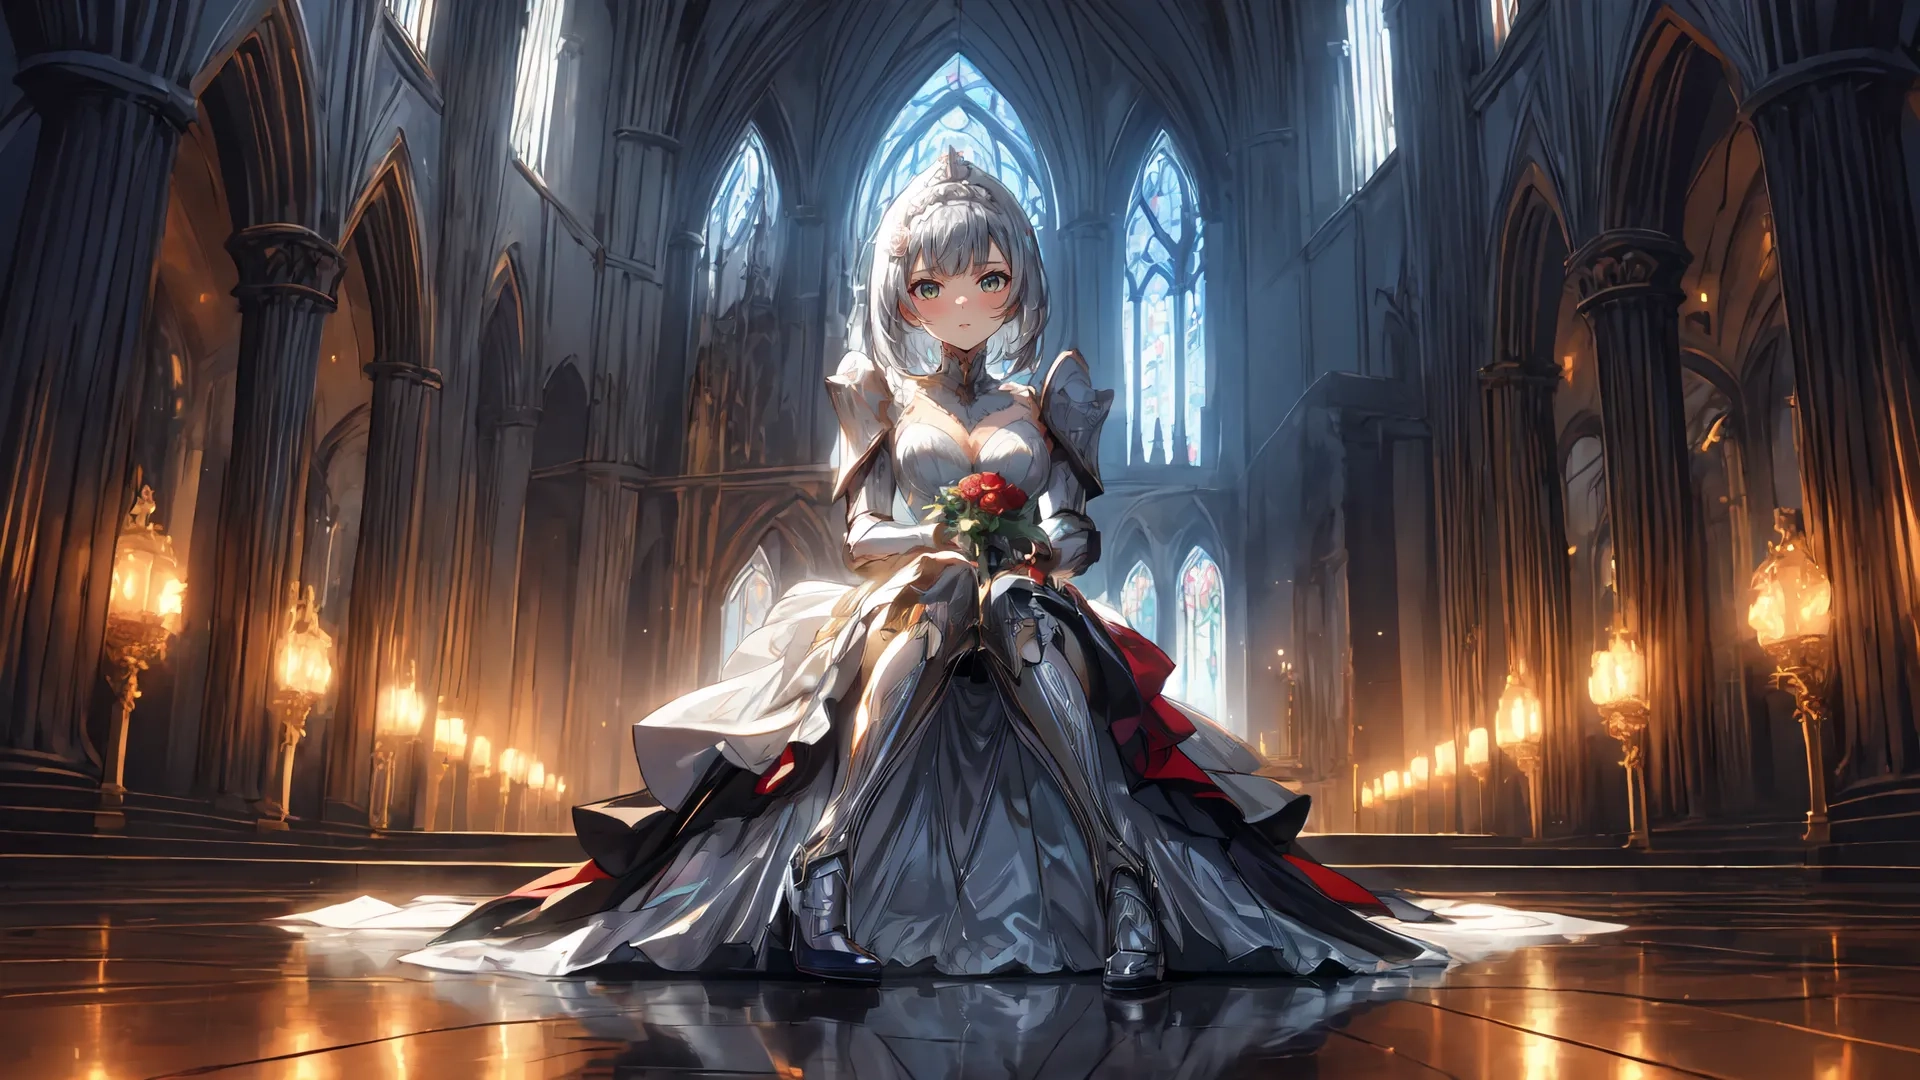 young lady dressed in a grey wedding gown posing with her sword and flower bouquet near lighted castle windows in evening light scene with lighting effect
